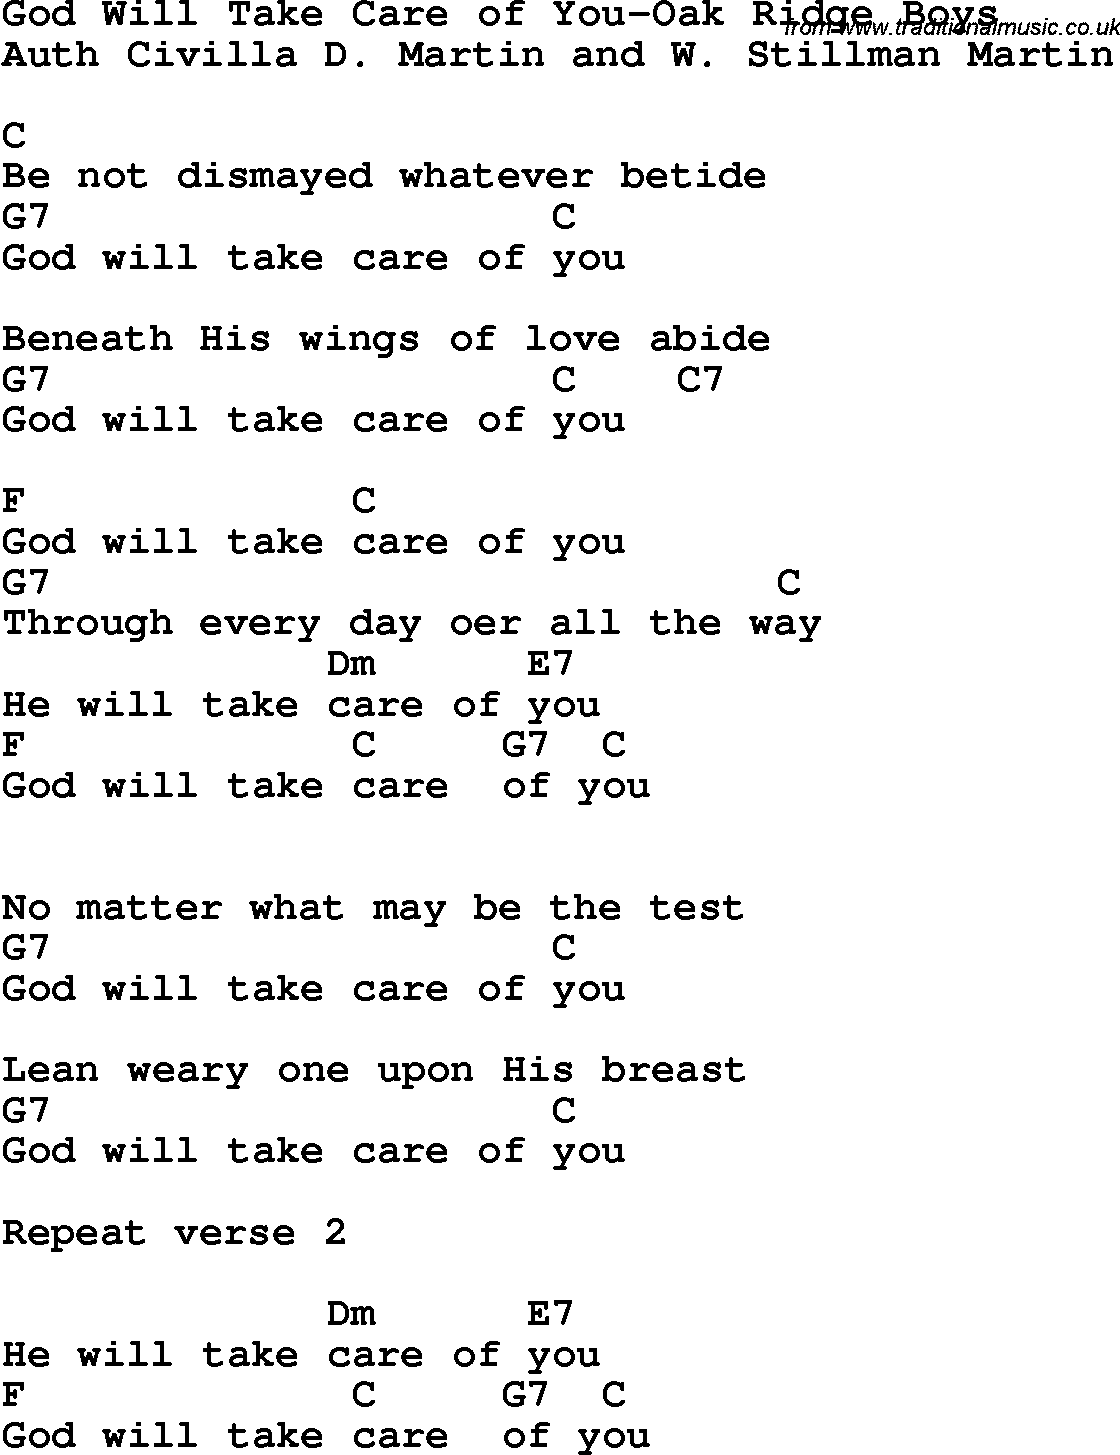 Country, Southern and Bluegrass Gospel Song God Will Take Care of You-Oak Ridge Boys lyrics and chords